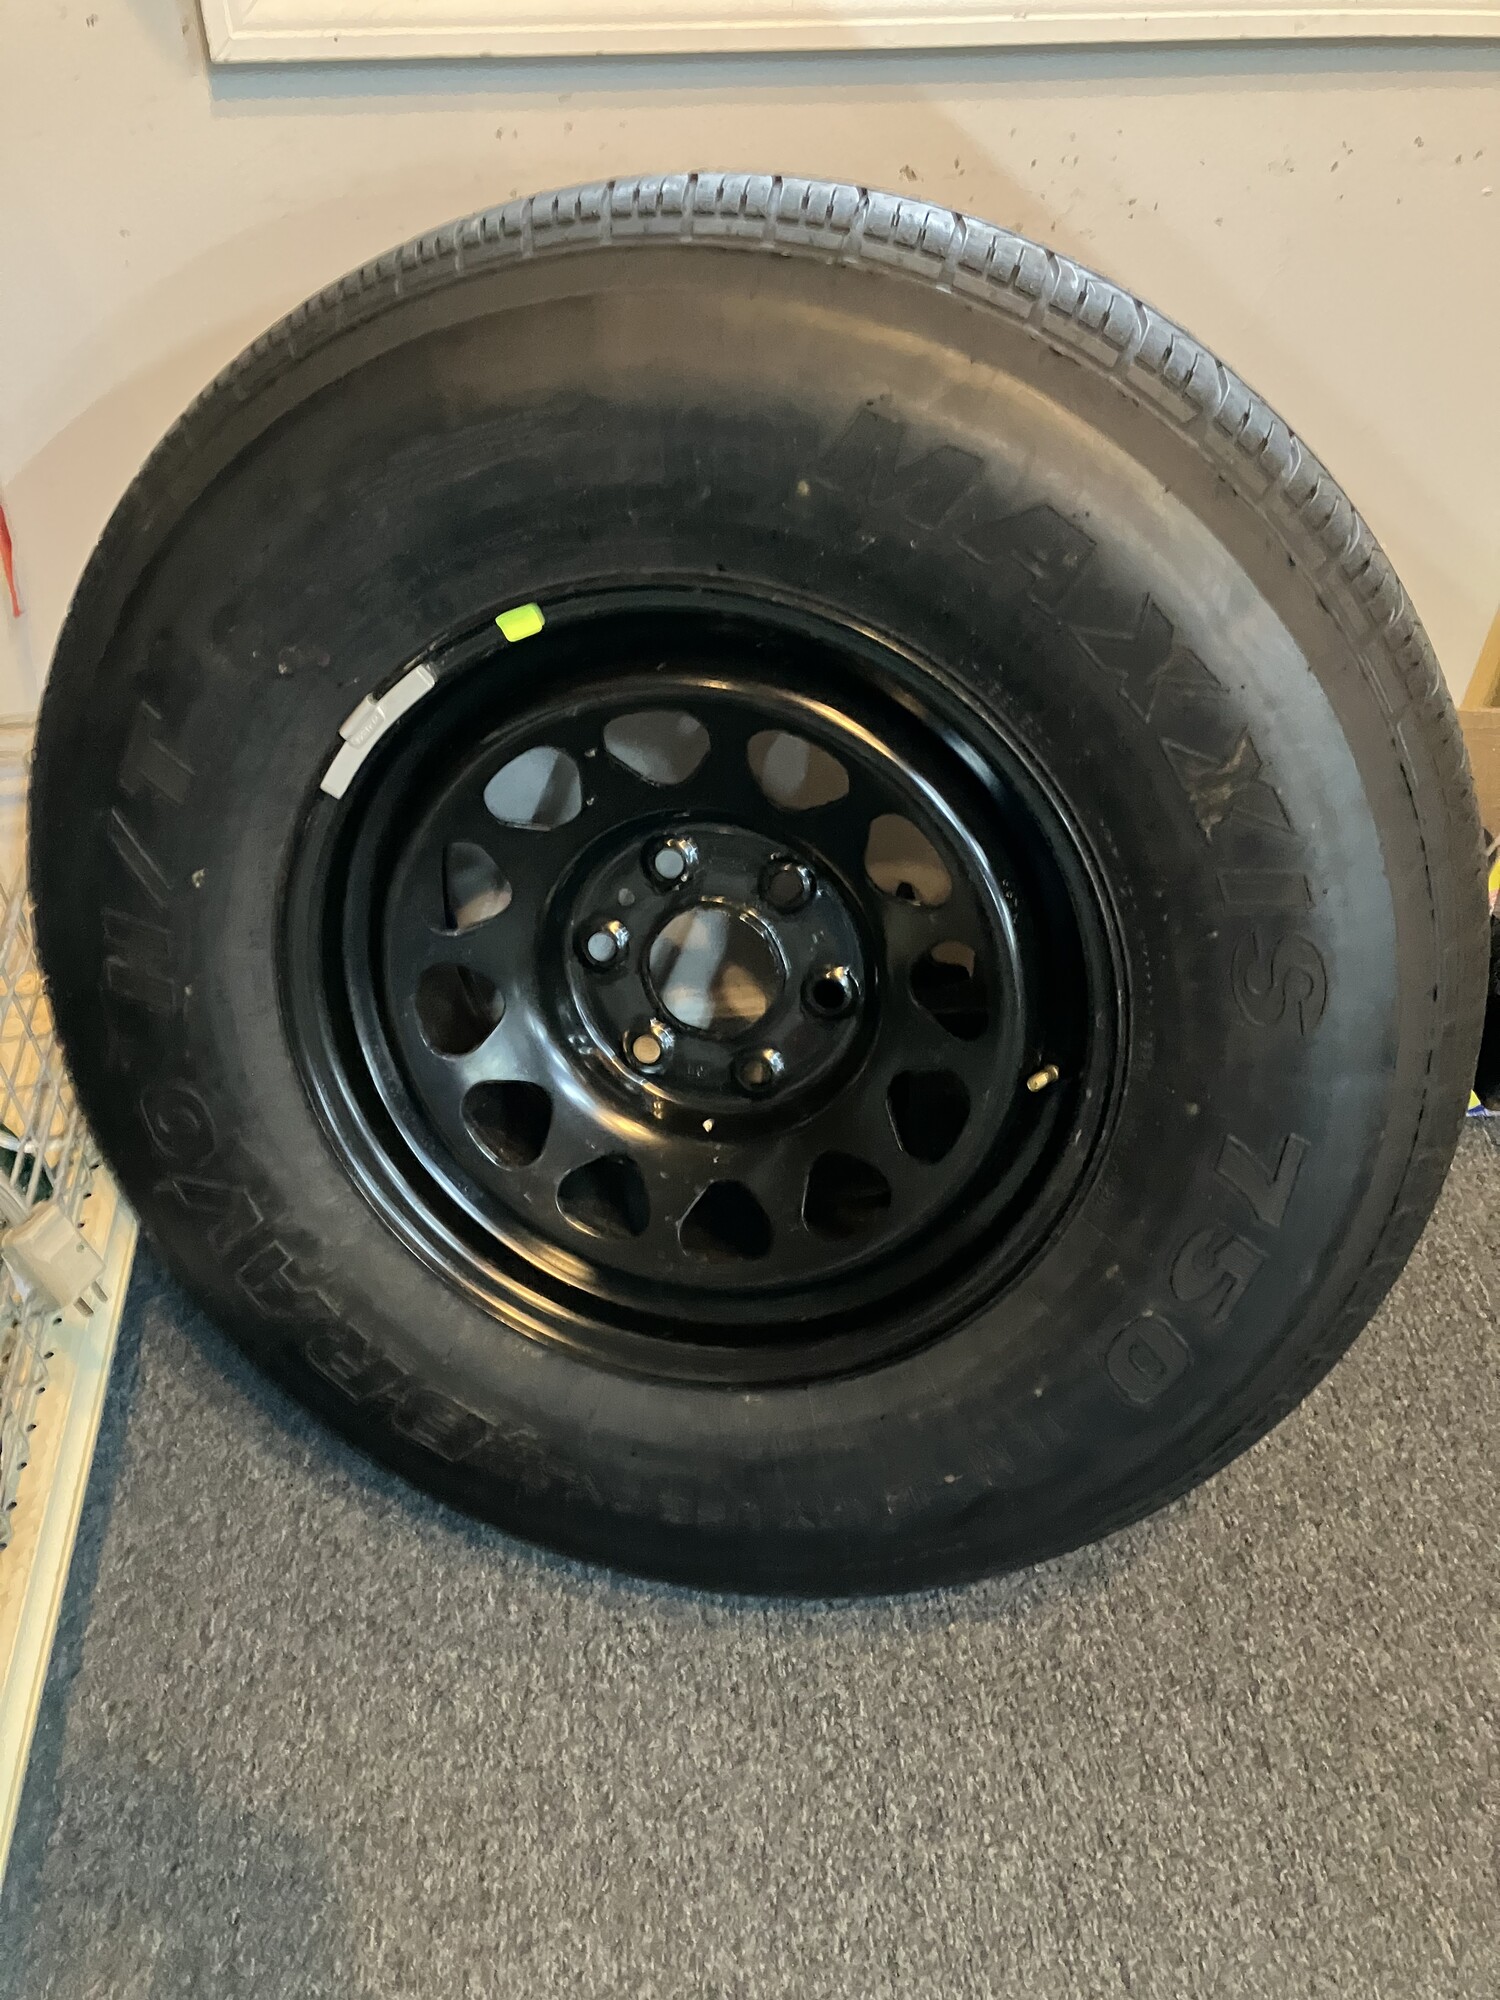 Spare Tire, Chevrolet Truck, Size: 255/80/17, 6 lug
NEW